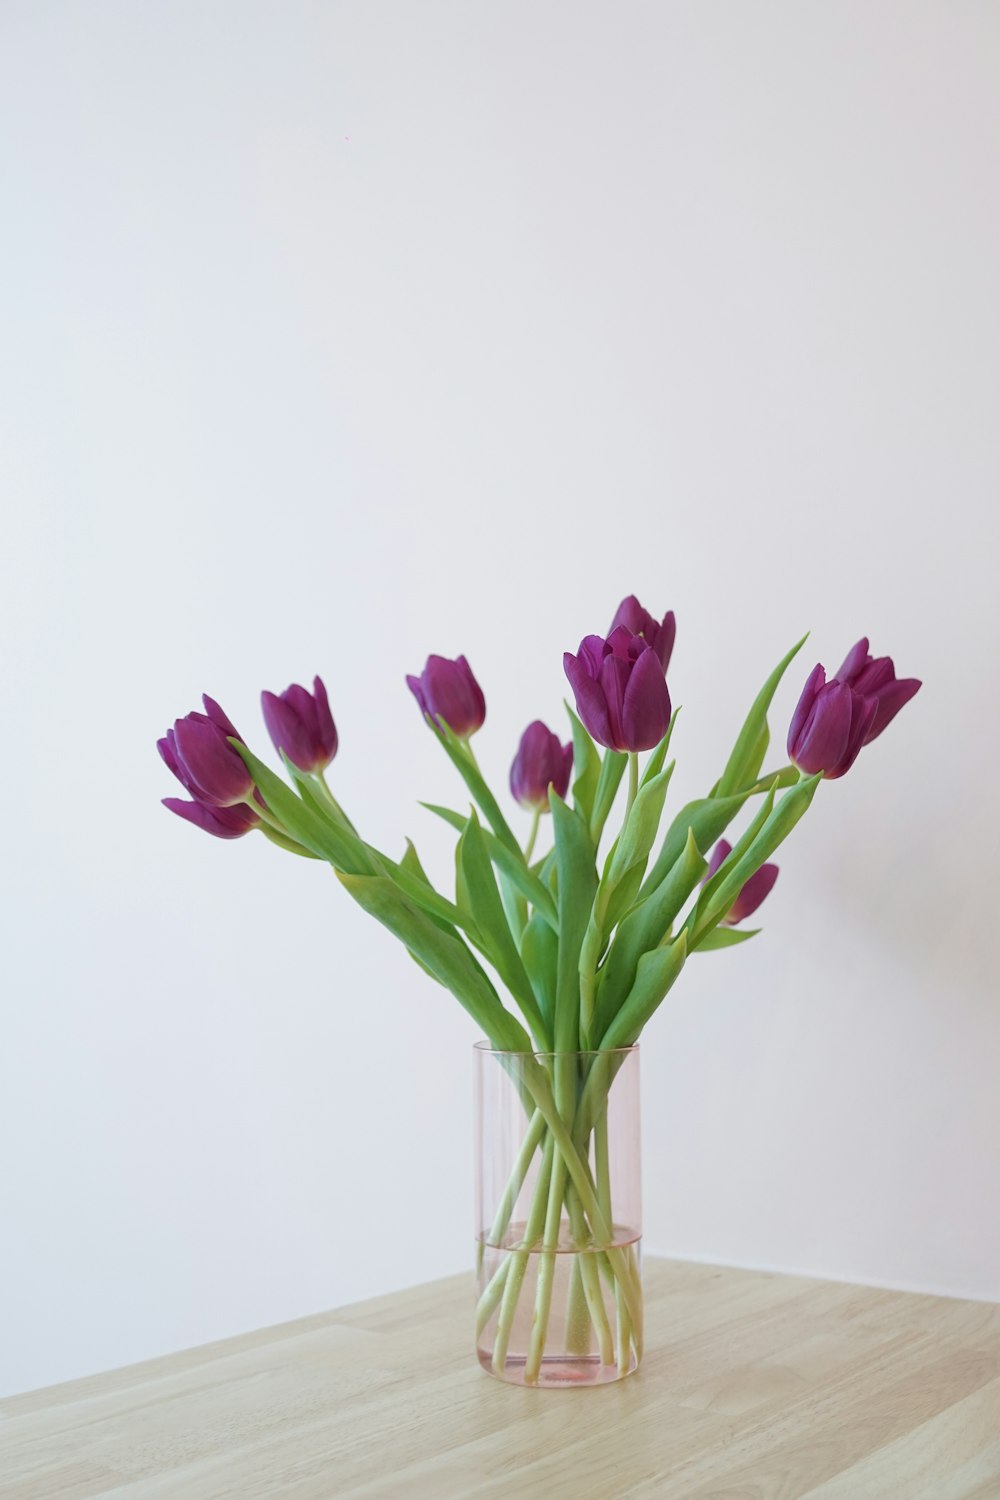 a vase filled with purple flowers on top of a wooden table